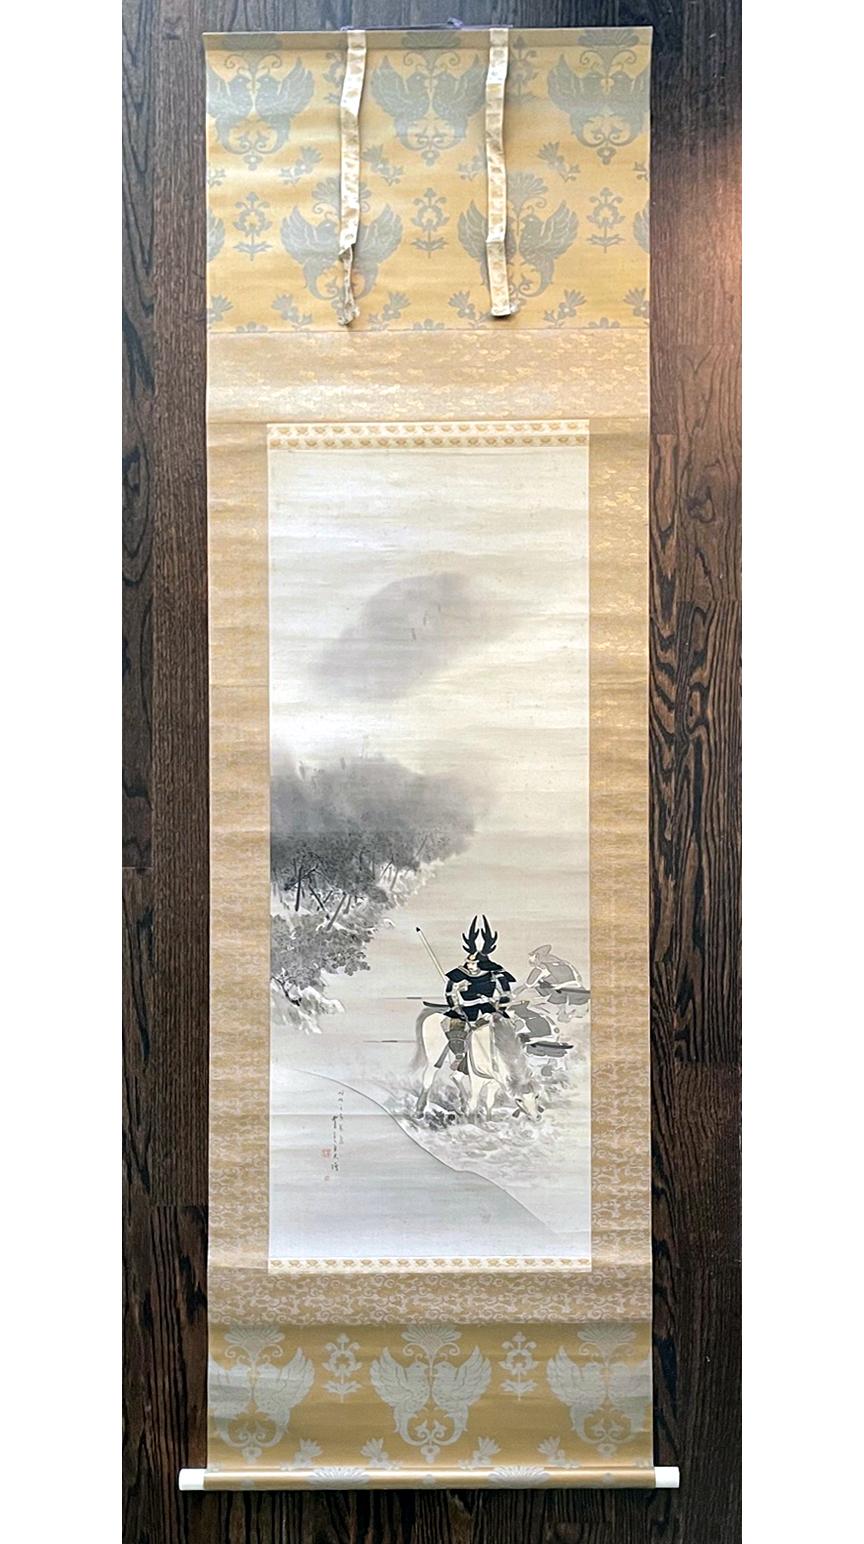 Japonisme Rare Triptych Scroll Paintings by Watanabe Seitei Meiji Period For Sale